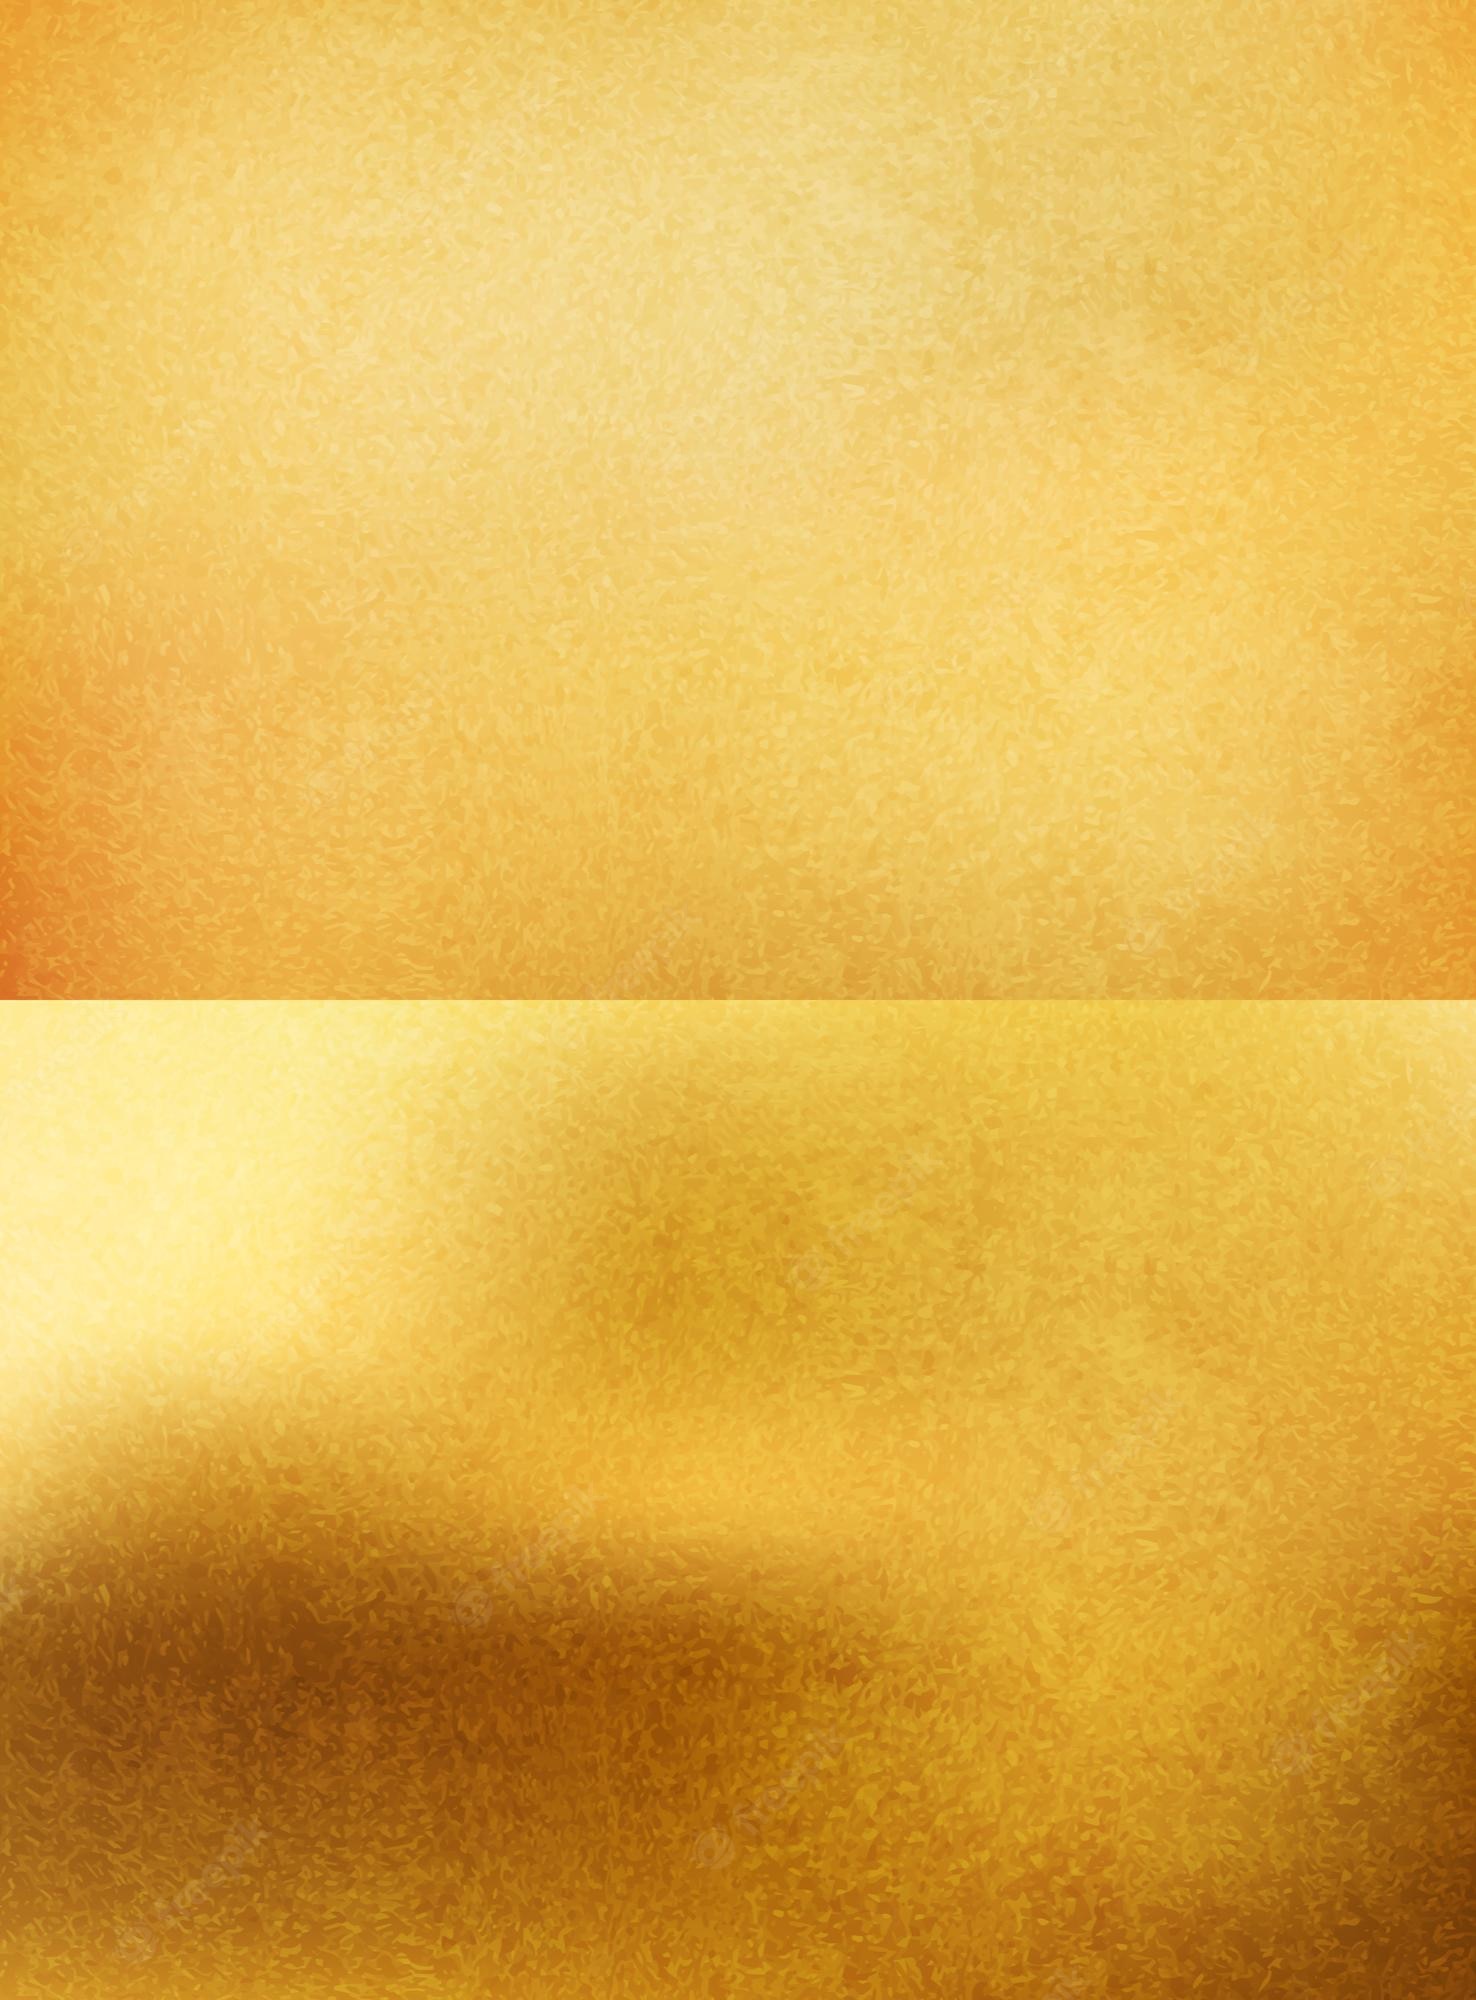 Pretty Gold Backgrounds